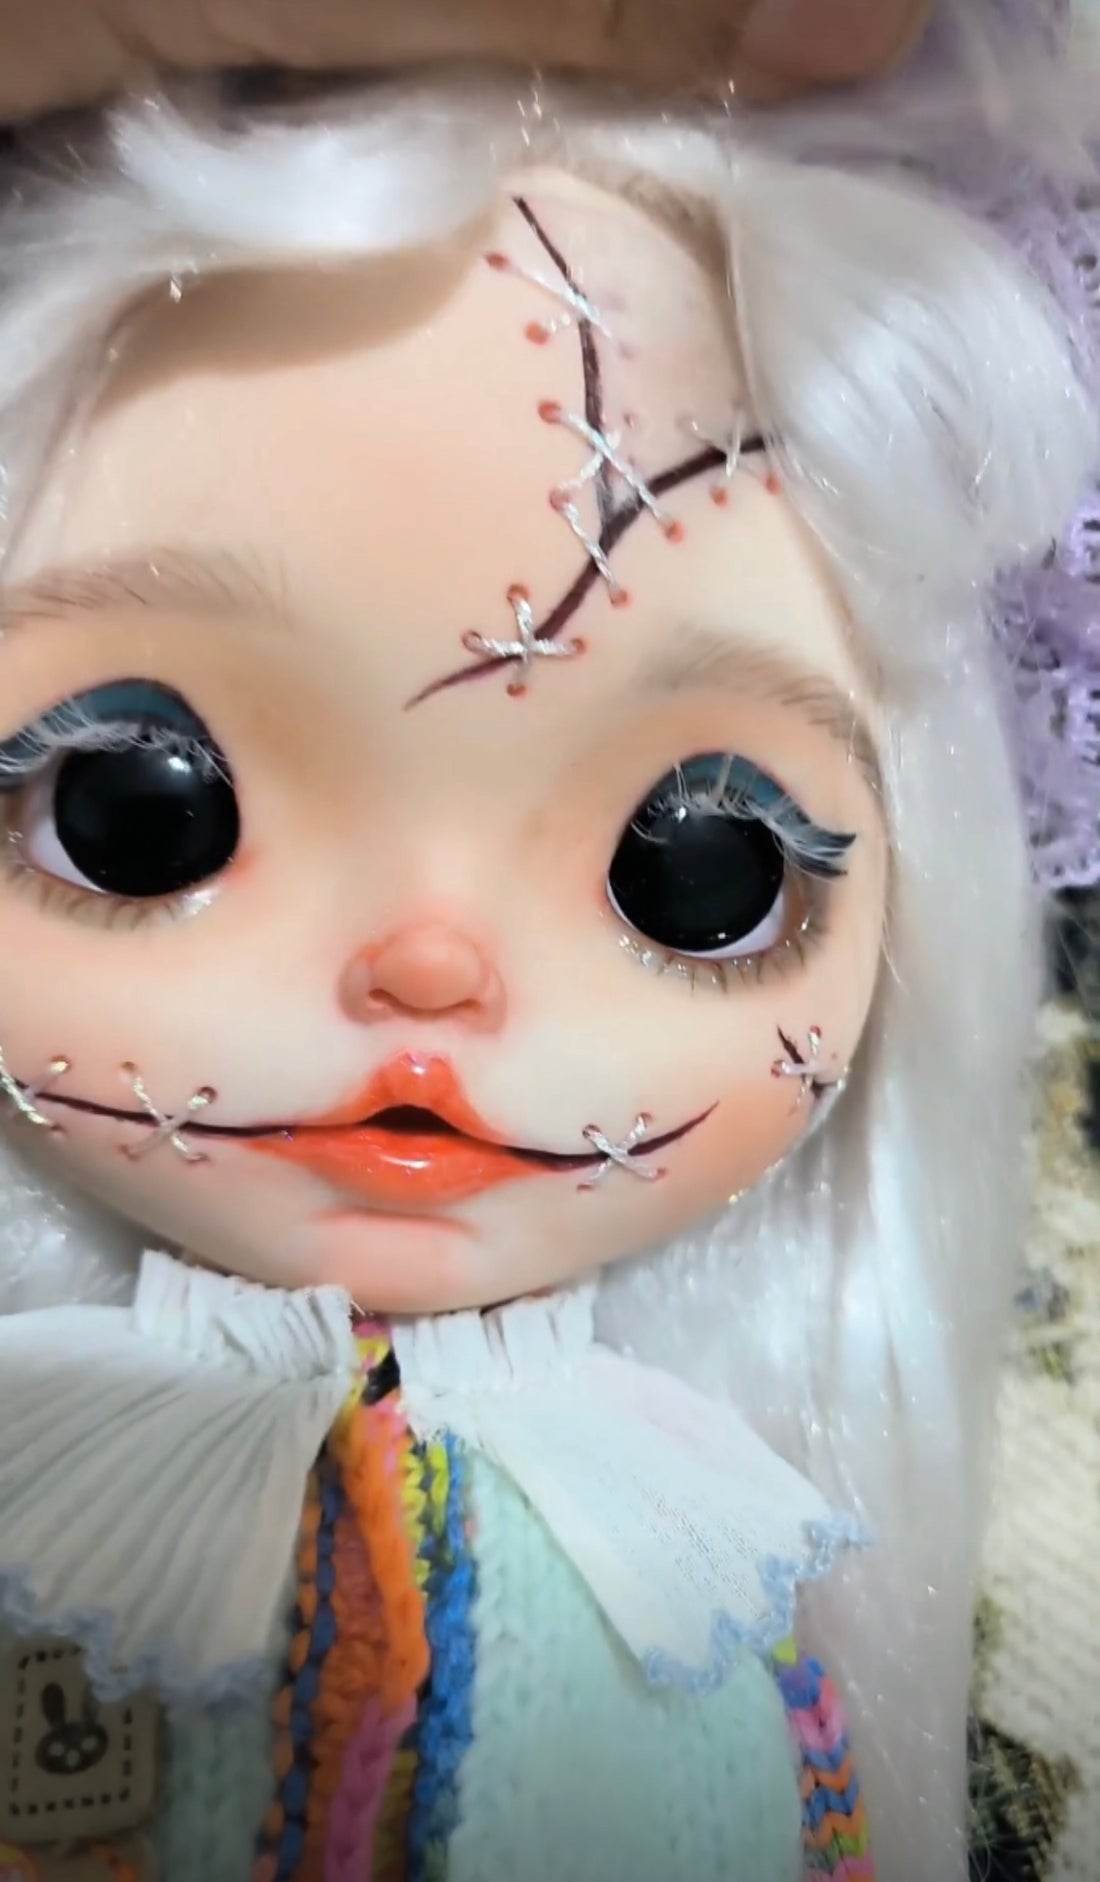 Creating Your Own Unique Blythe Doll: A Step-by-Step Guide